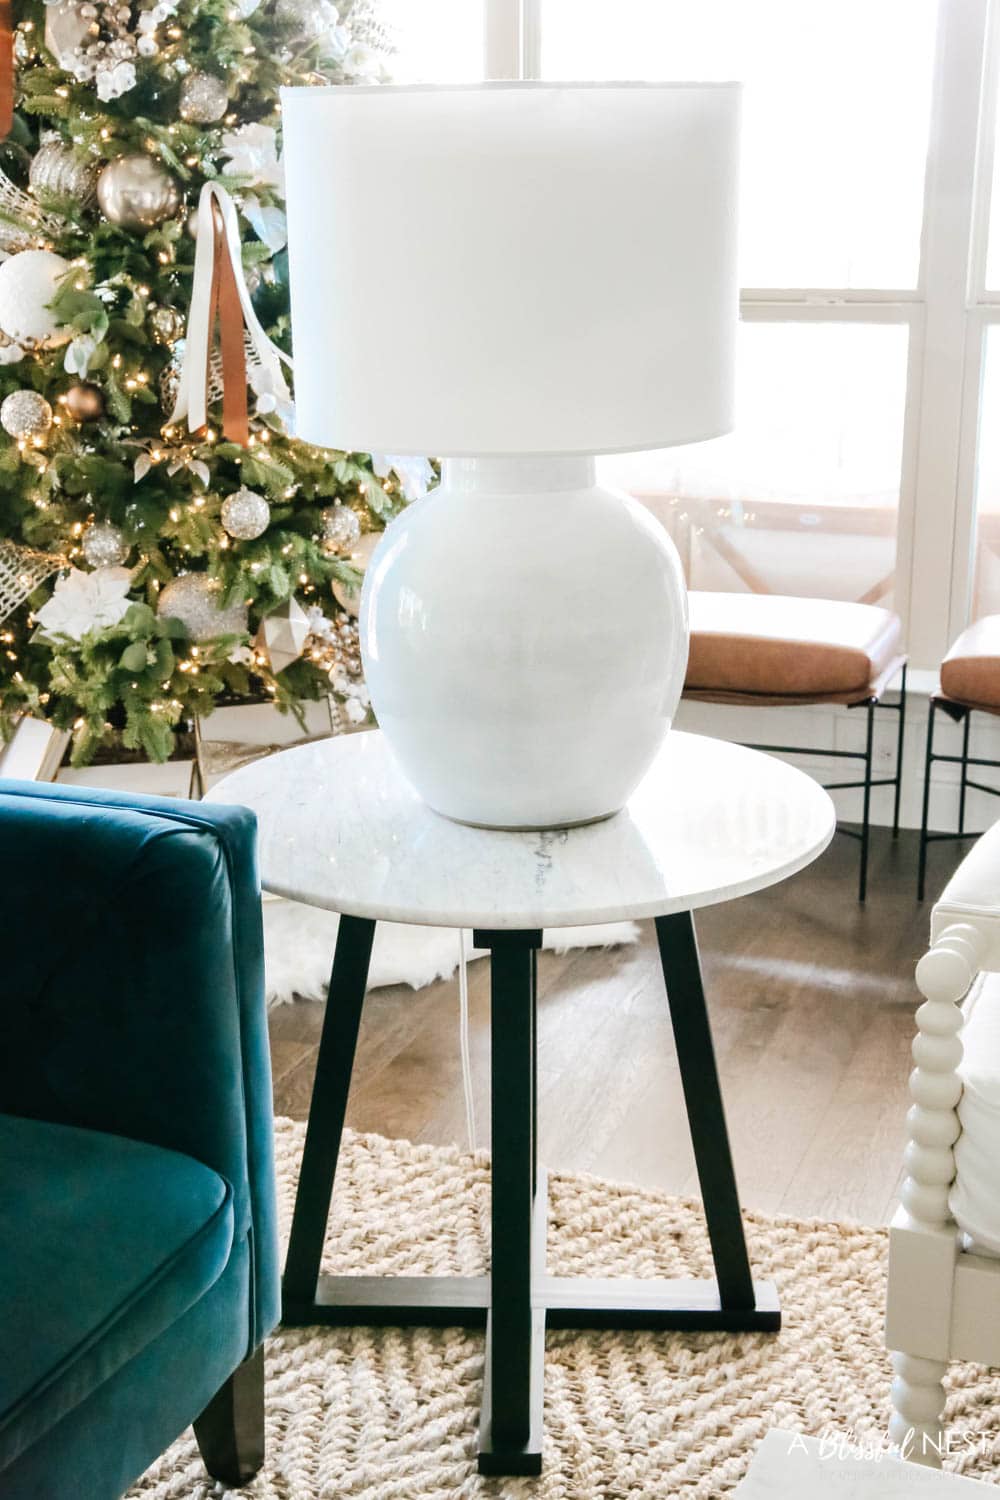 Marble topped side table with round white table lamp in front of a Christmas tree